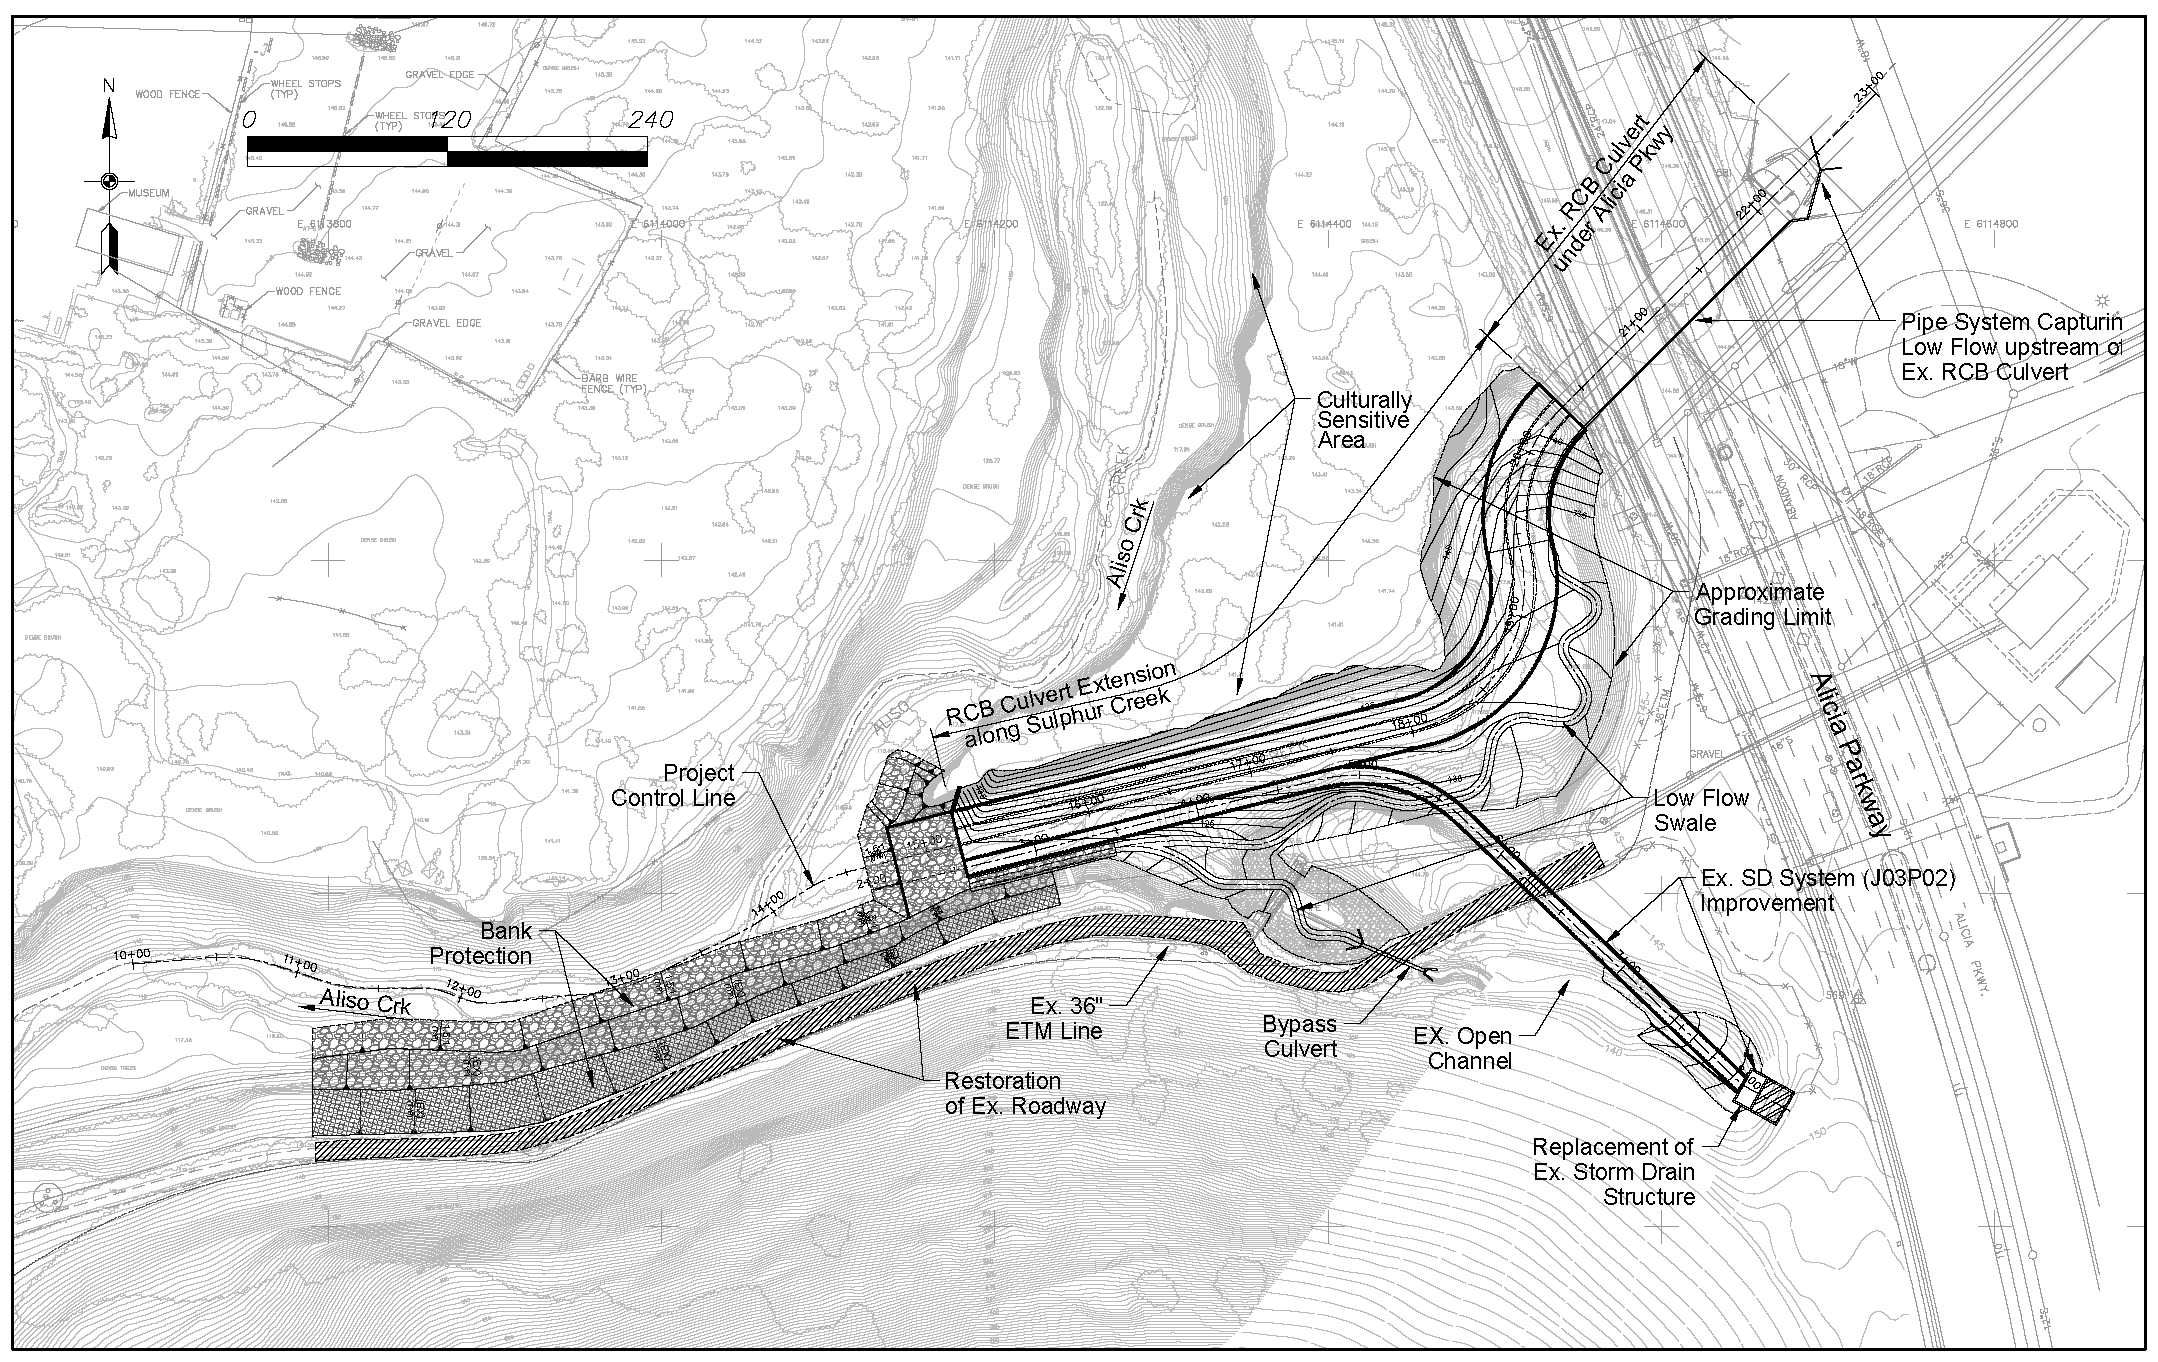 e:\file these\south oc irwm file\tetratech\socwa 2012\prop 1e grant socwa\attachment 3 - work plan\work plan 1 of 2\figure 3_3-overall proposed improvements 2013-01-21.jpg